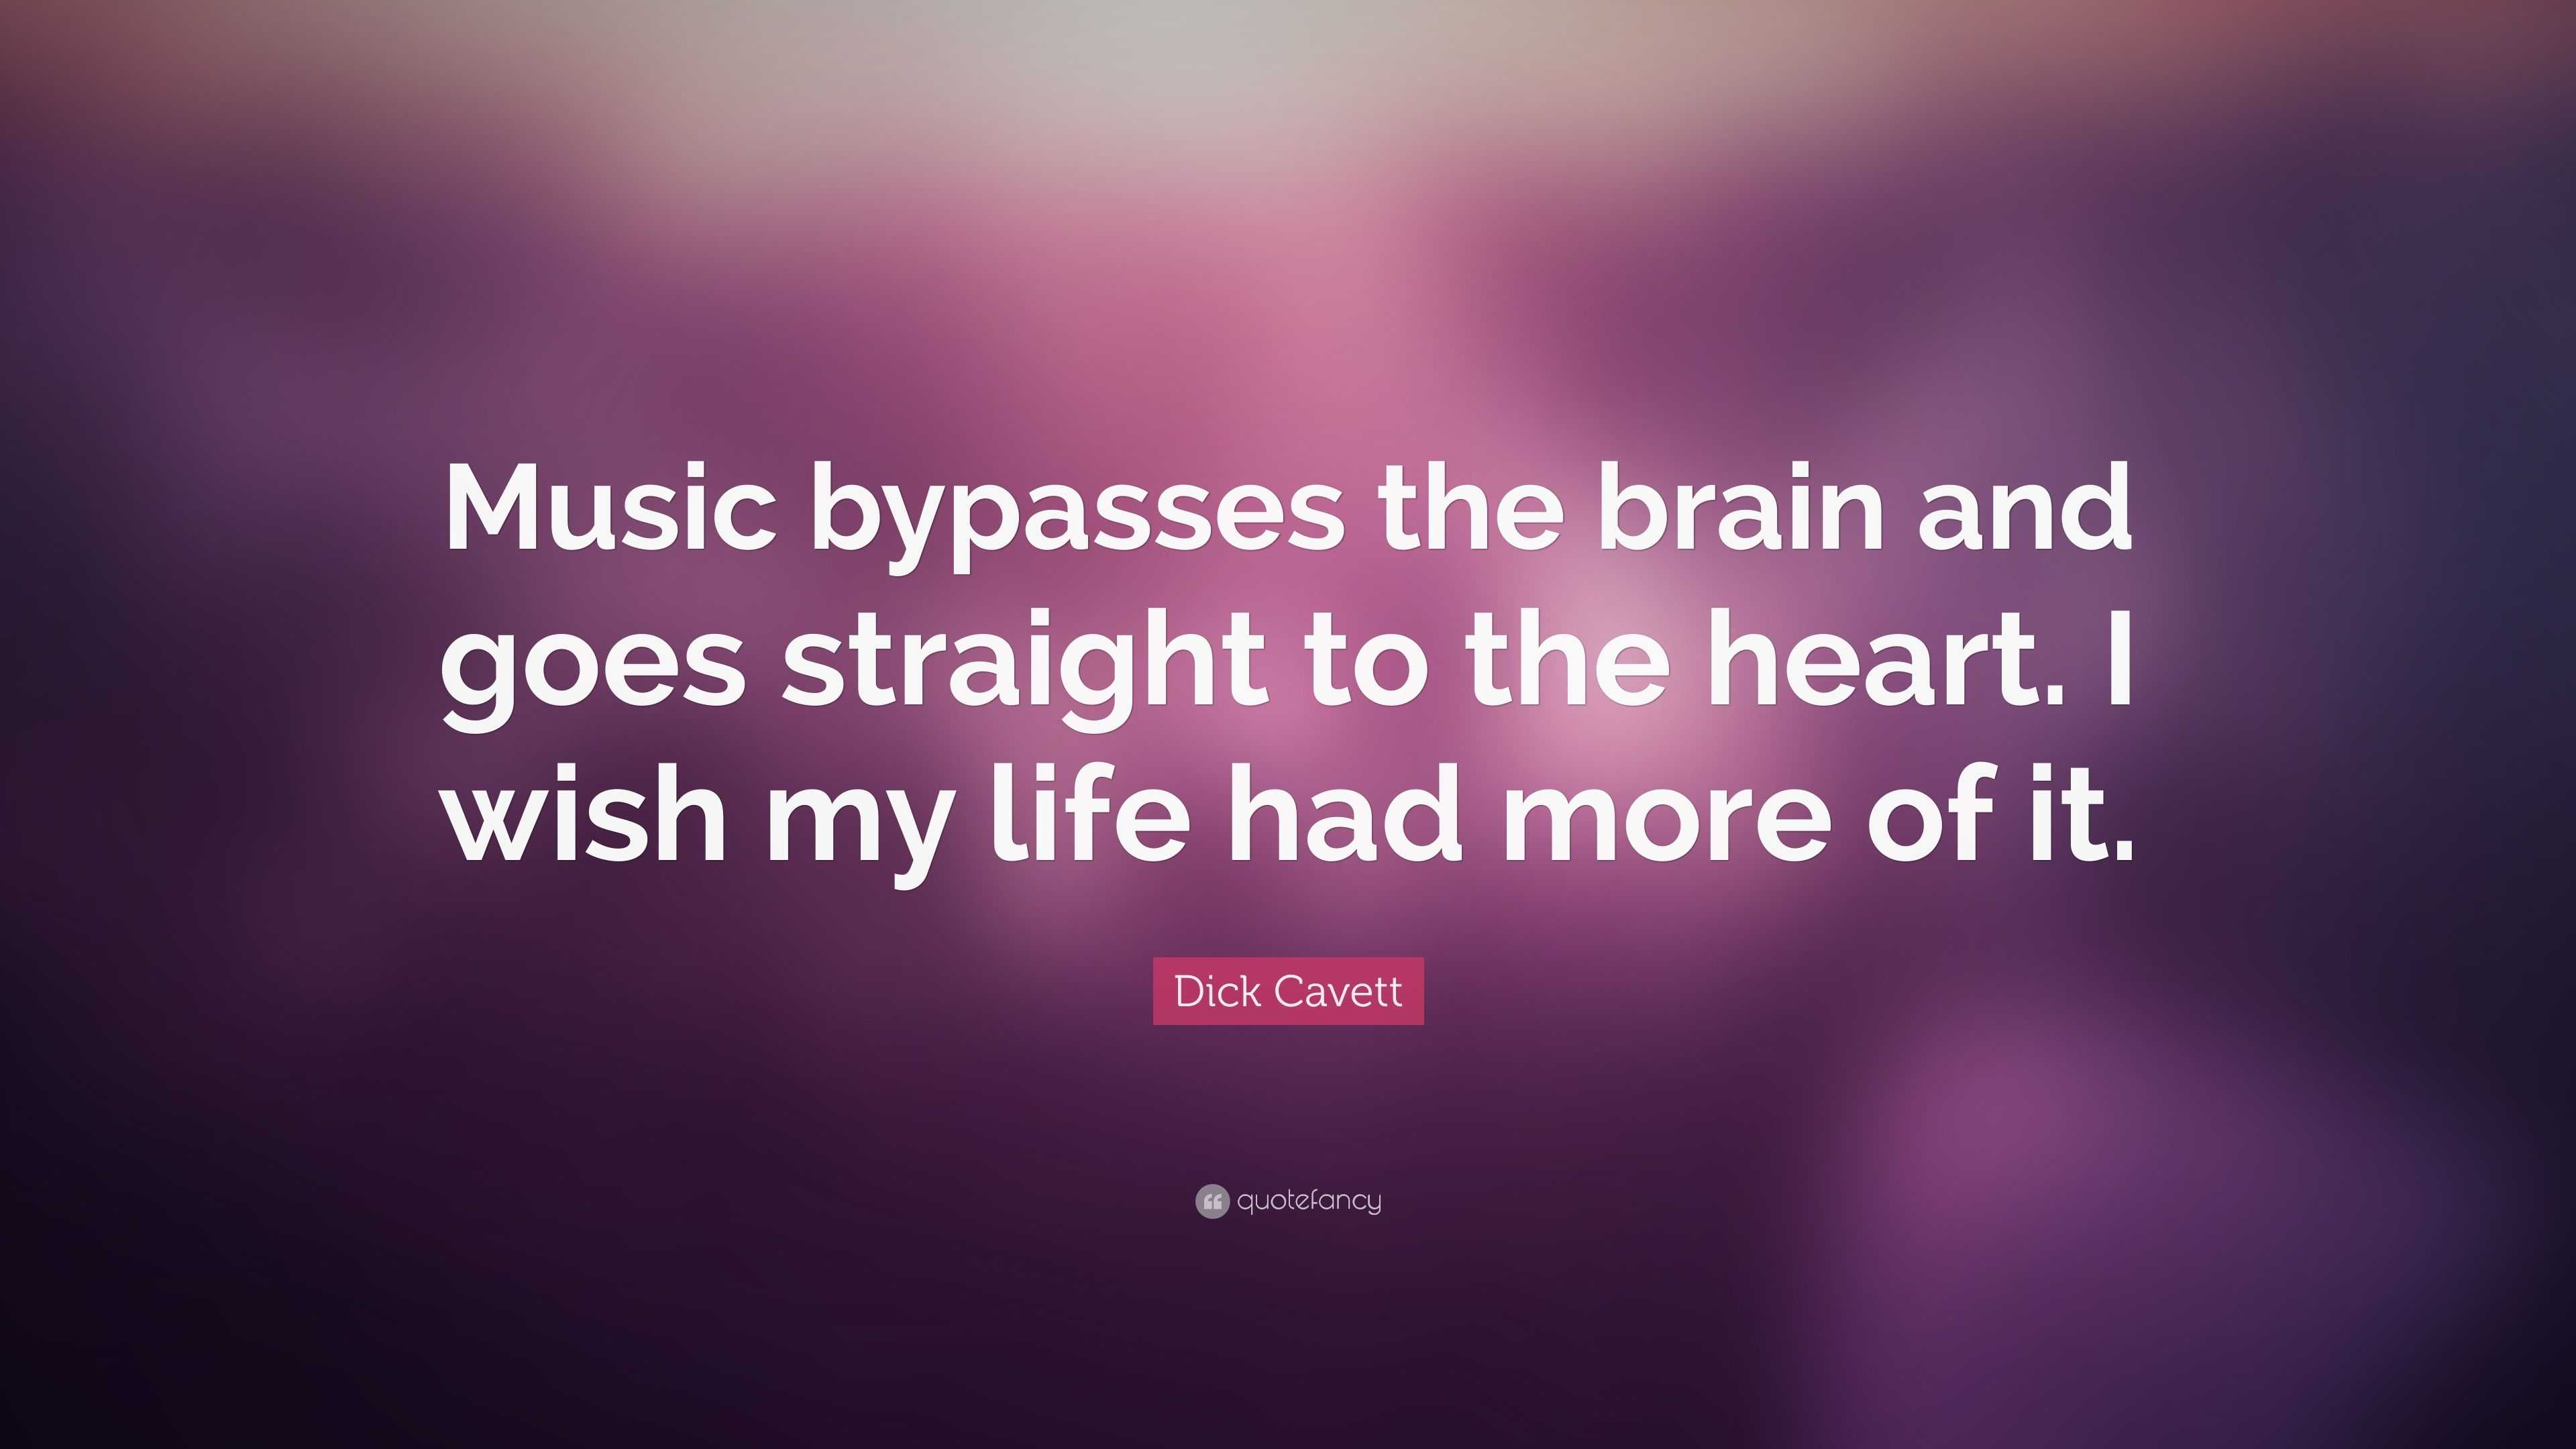 Dick Cavett Quote: “Music bypasses the brain and goes straight to the ...